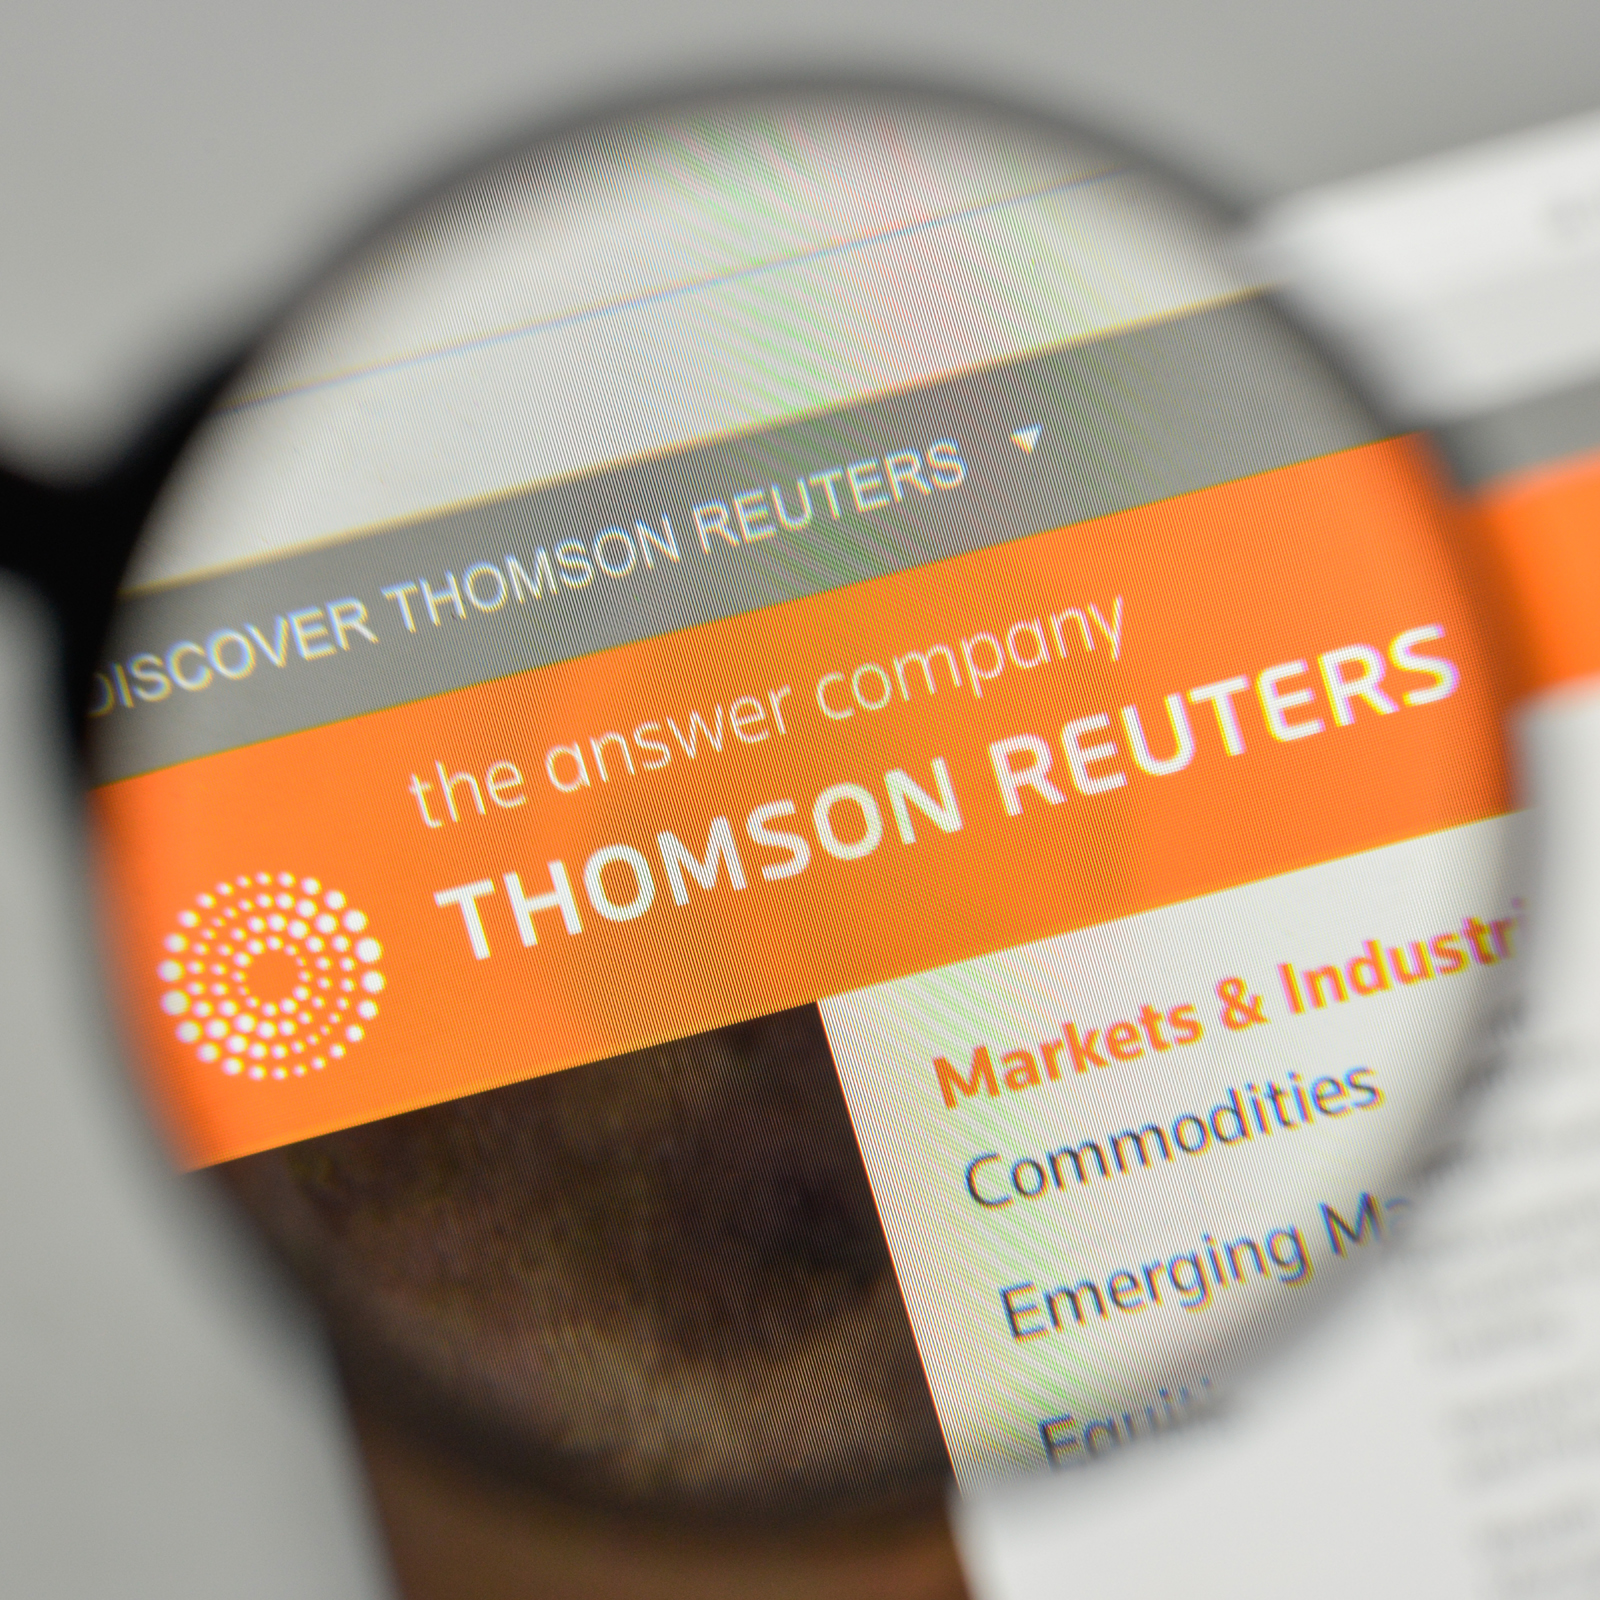 Thomson Reuters Launches Real Time Rates for Six Cryptocurrencies